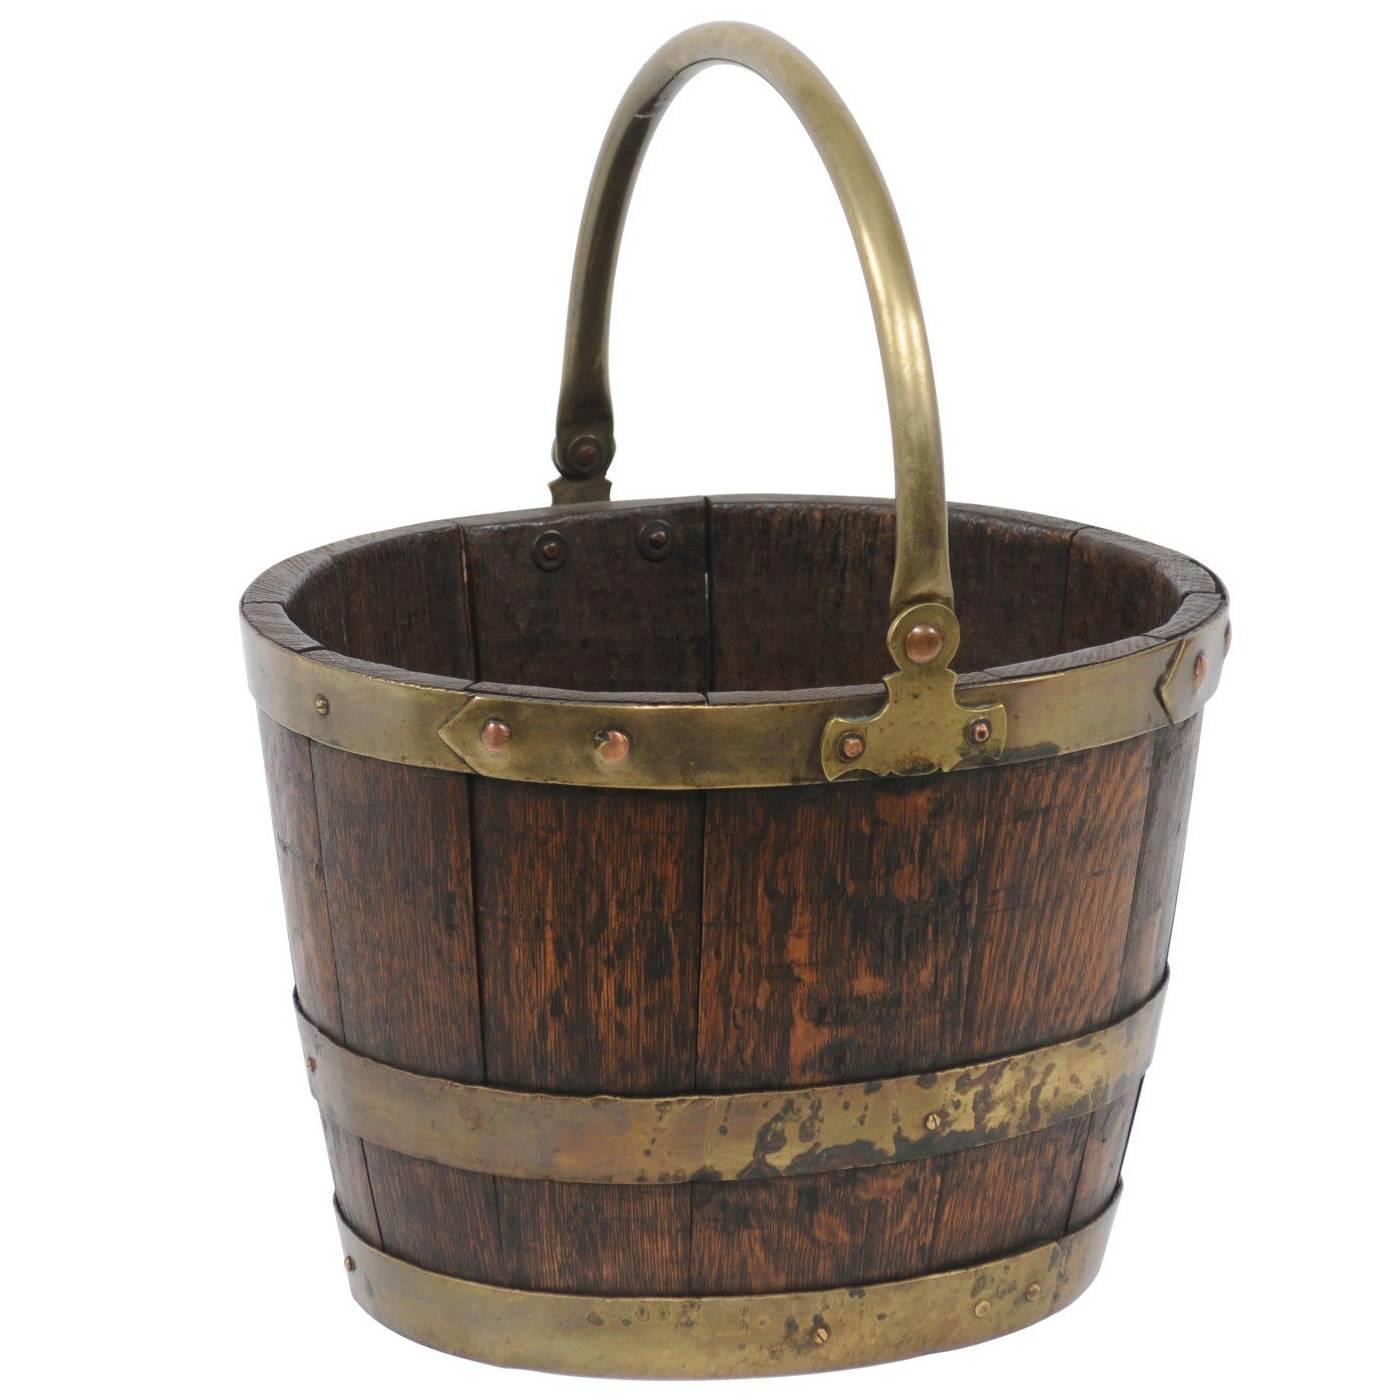 English Oak and Brass Bucket with Handle from the Late 19th Century